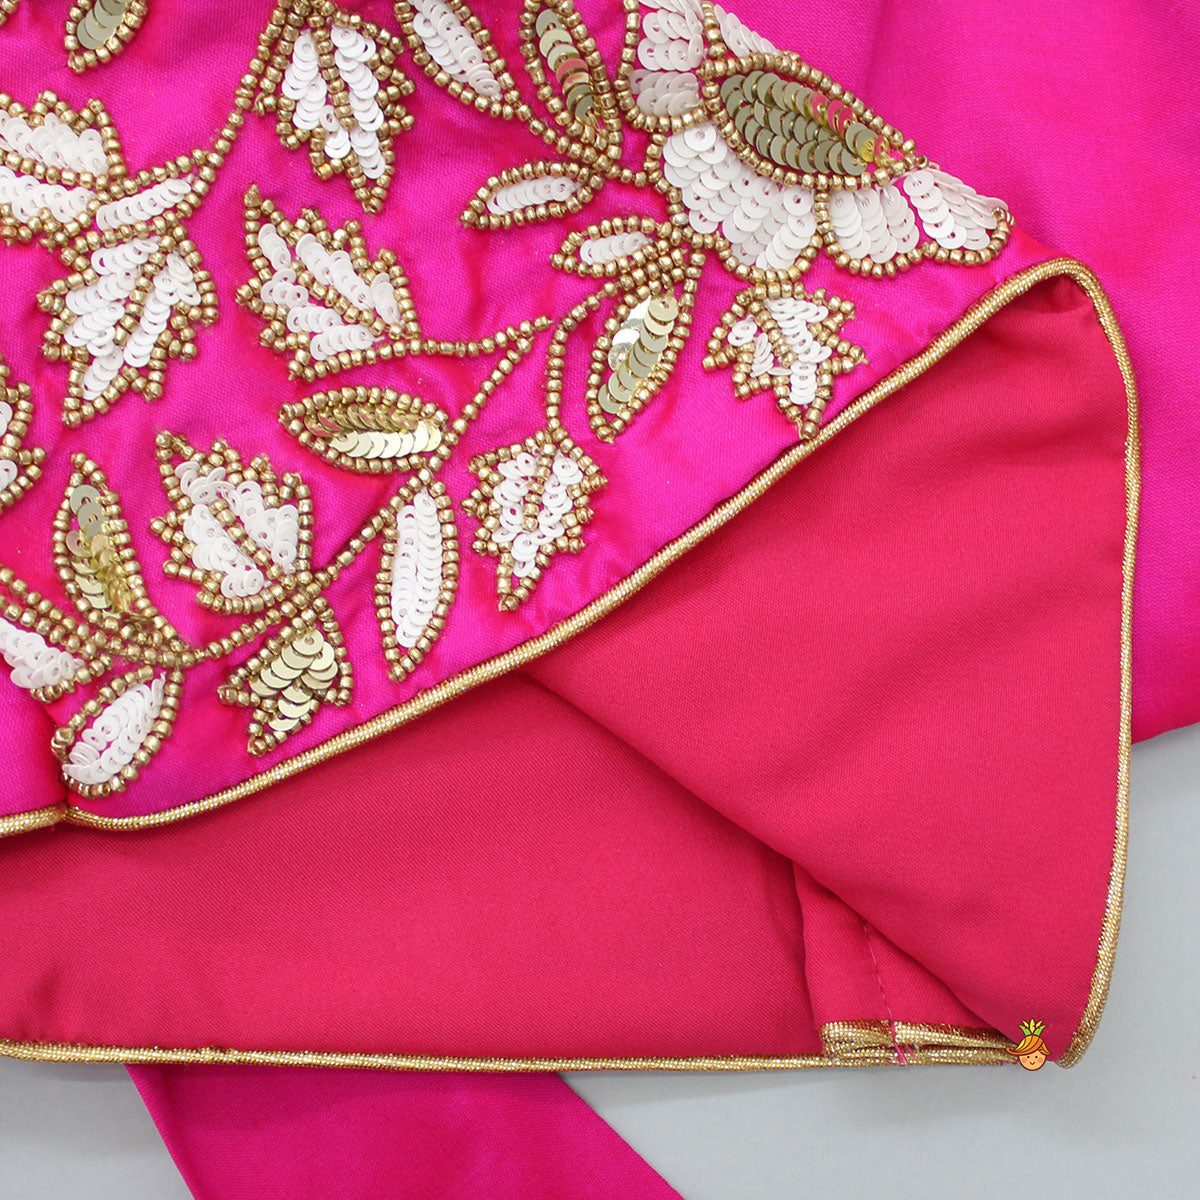 V Neck Floral Embroidered Pink Top And Scalloped Hem Lehenga With Net Dupatta